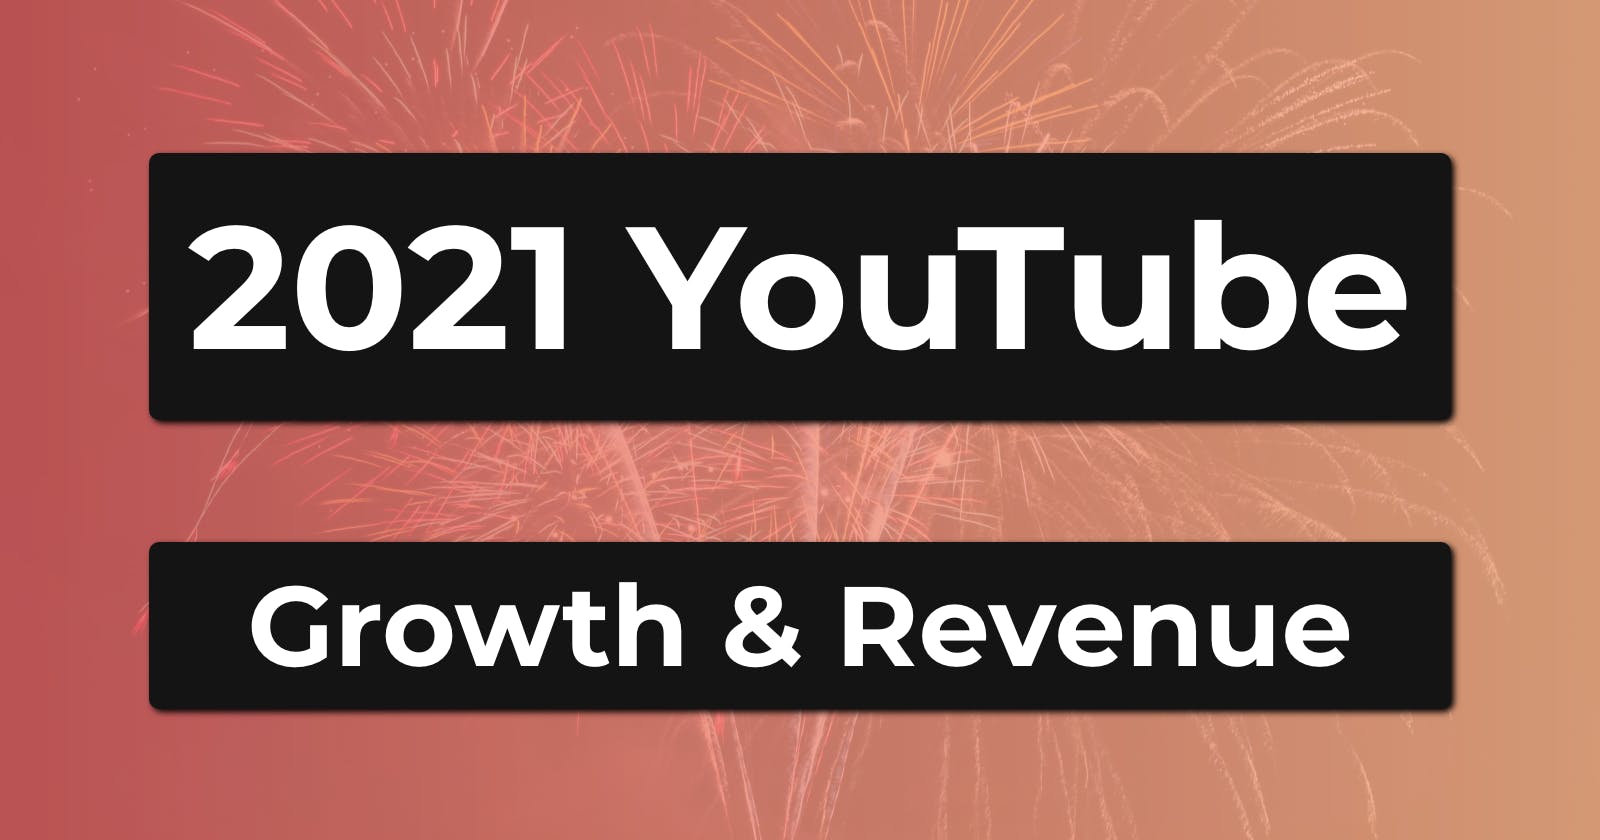 My 2021 YouTube Year In Review - Growth and Revenue